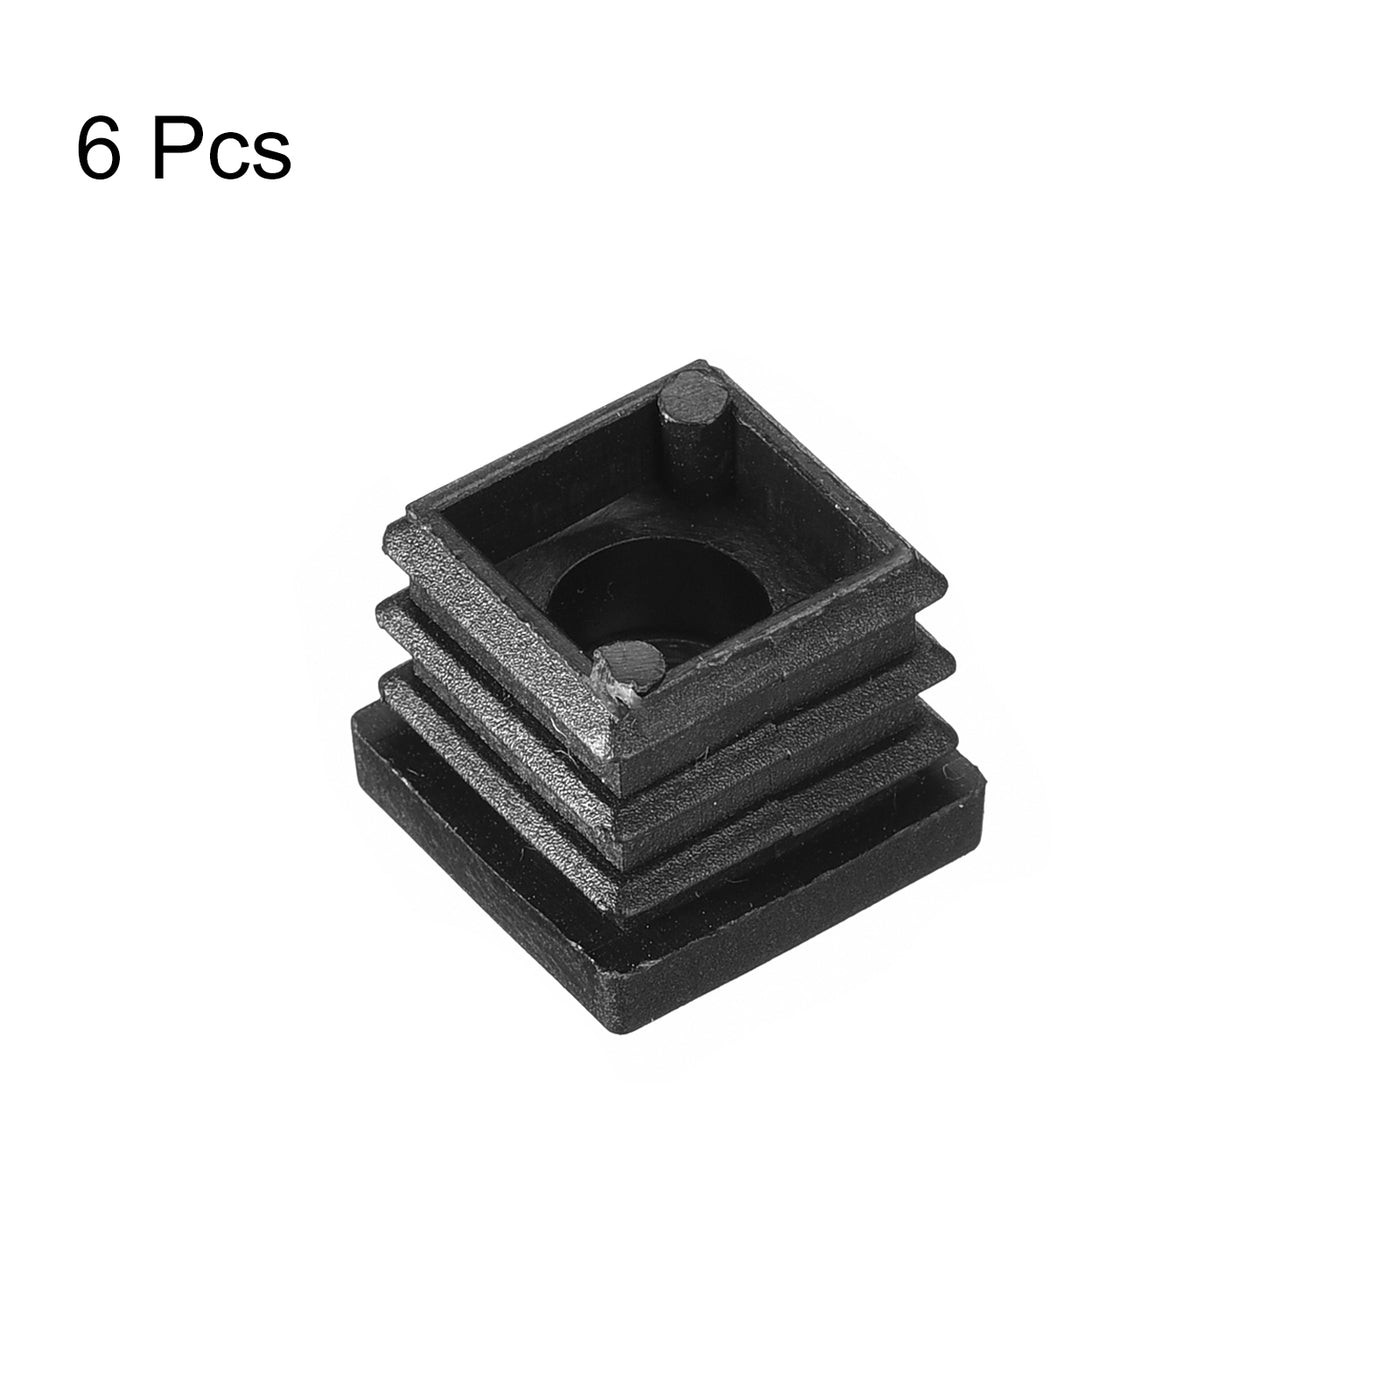 uxcell Uxcell 6Pcs 0.79"x0.79" Caster Insert with Thread, Square M8 Thread for Furniture